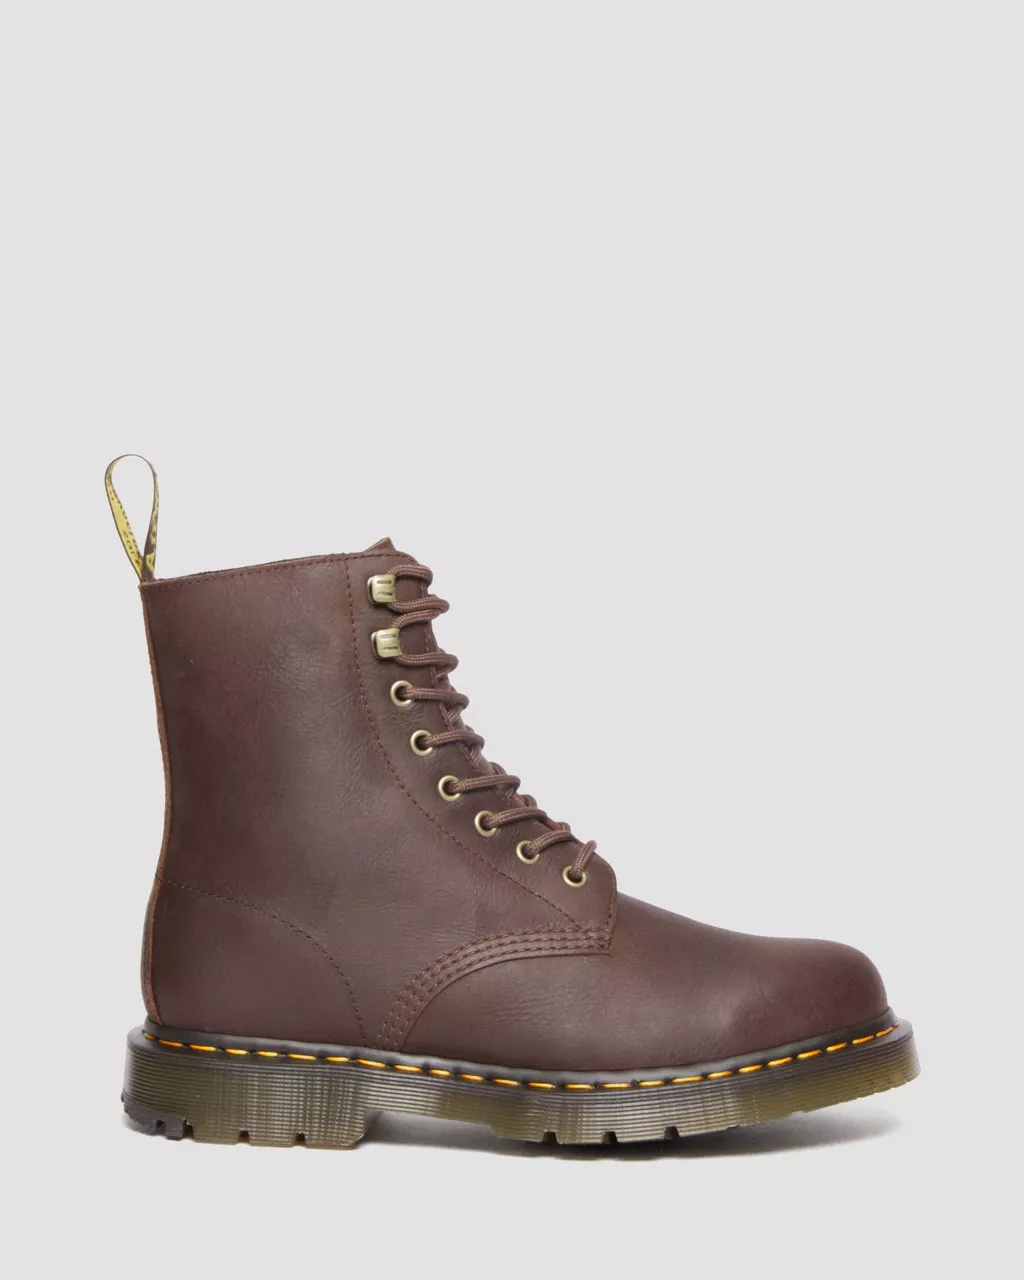 Dr. Martens - 1460 PASCAL WINTERGRIP - Chocolate Brown (Outlaw WP)